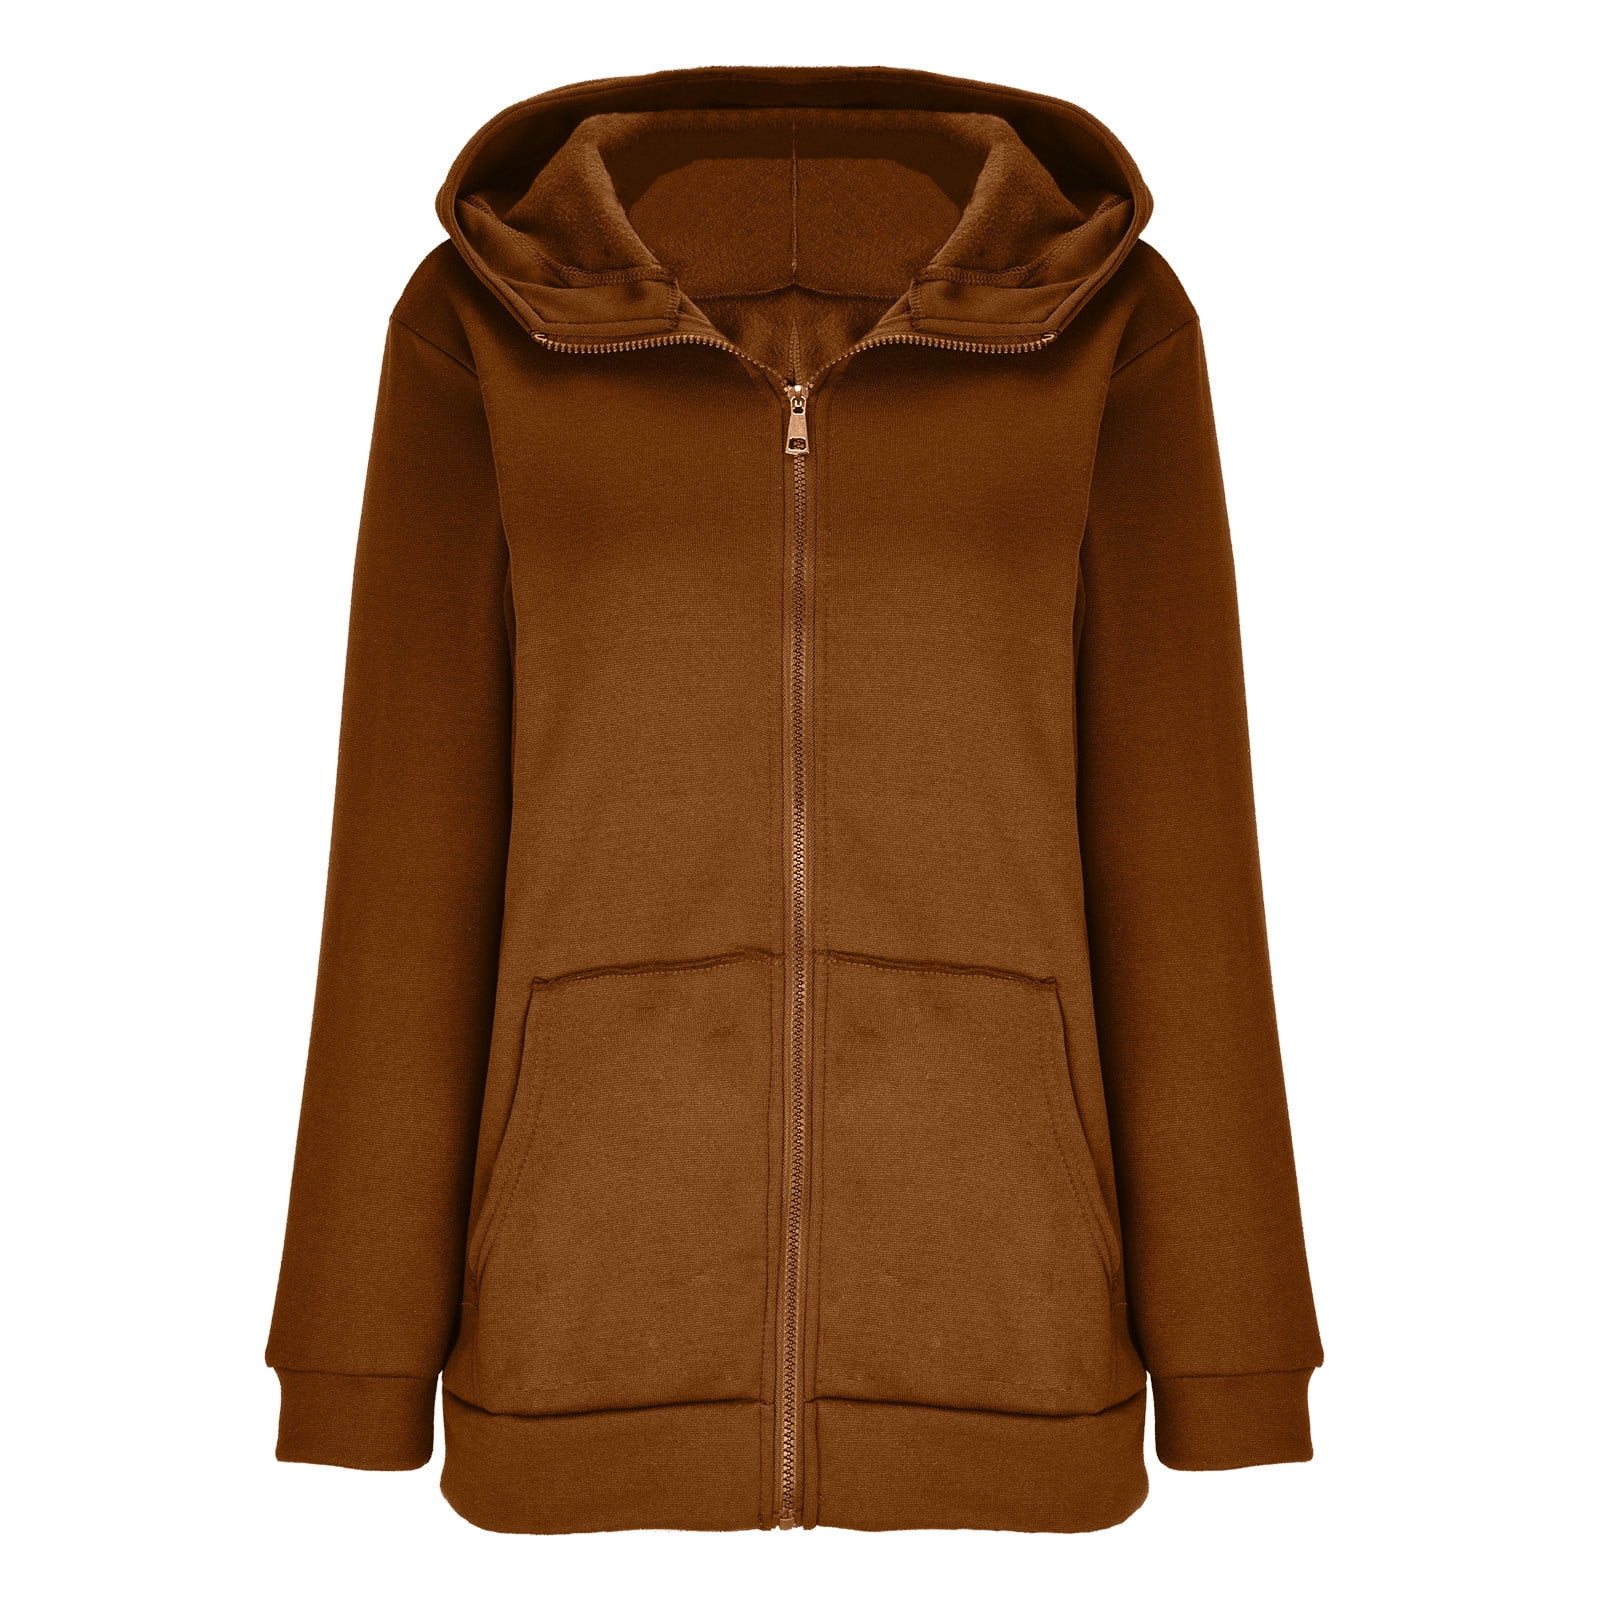 CHGBMOK Zip Up Hoodies for Women Solid Color Long Sleeve Sweatshirts Fall  Winter Jacket Coat Tops With Pockets 